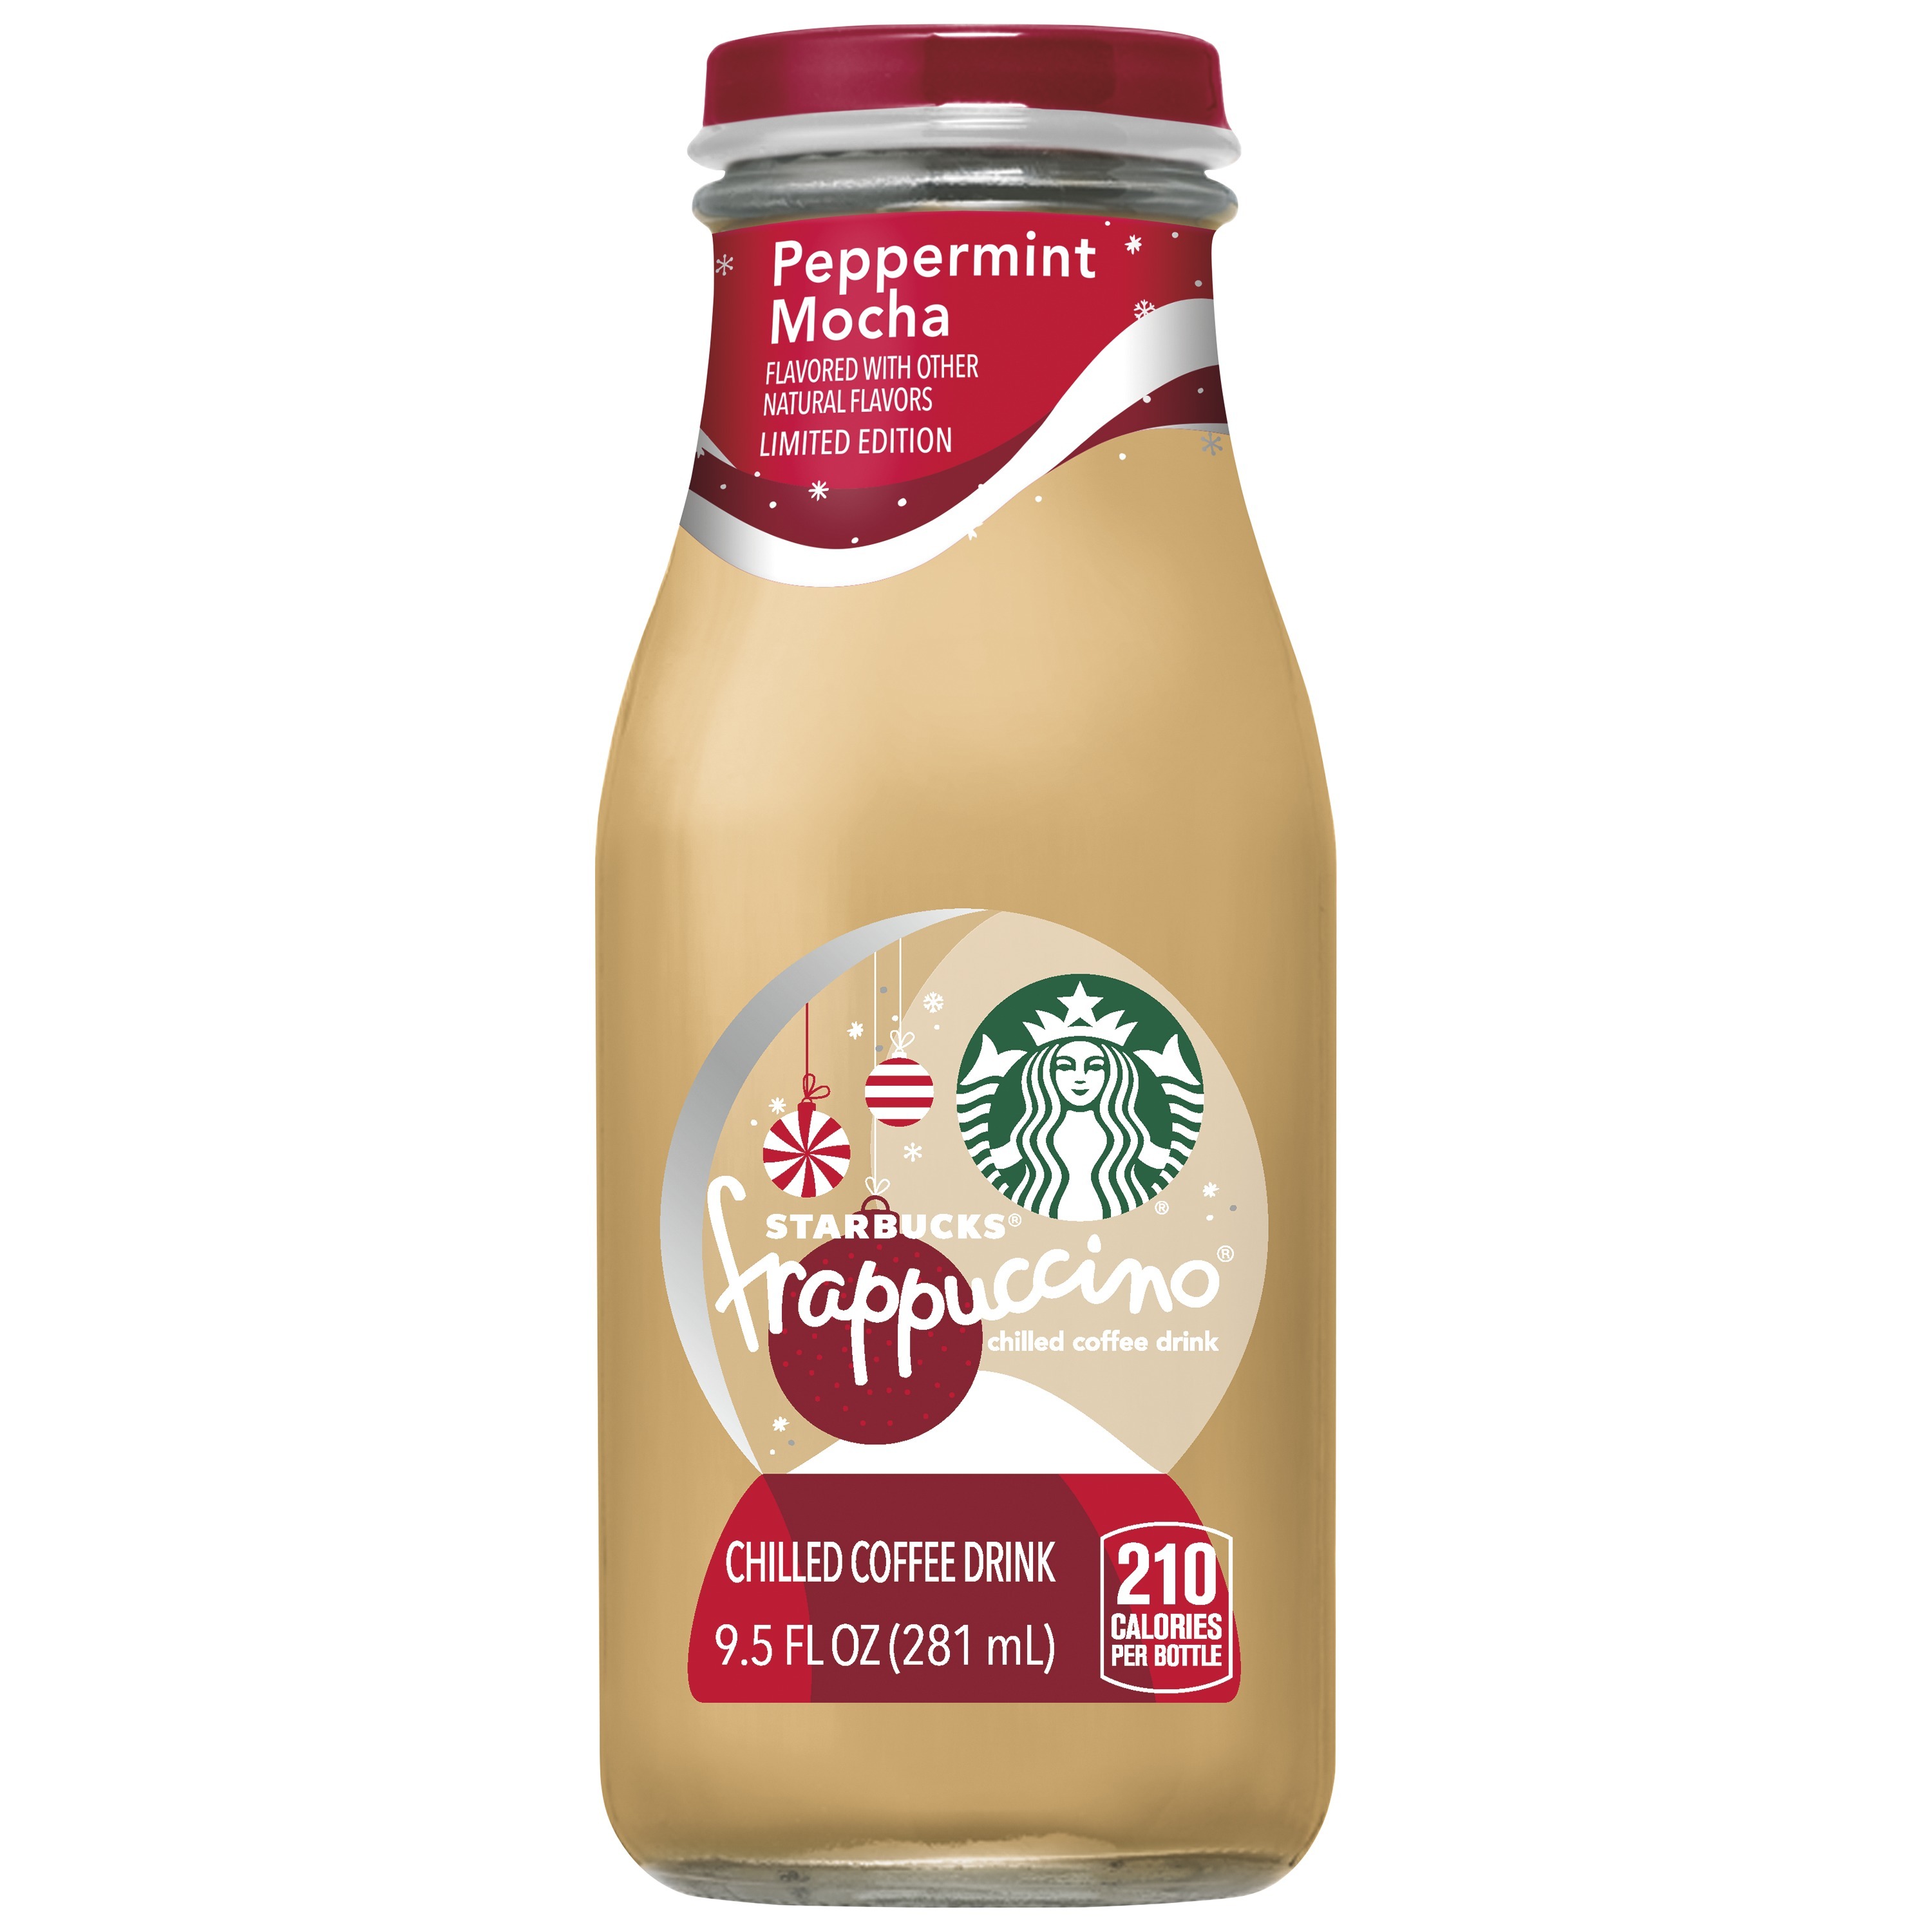 Starbucks Frappuccino Peppermint Mocha Flavored Chilled Coffee Drink Smartlabel™ 2016